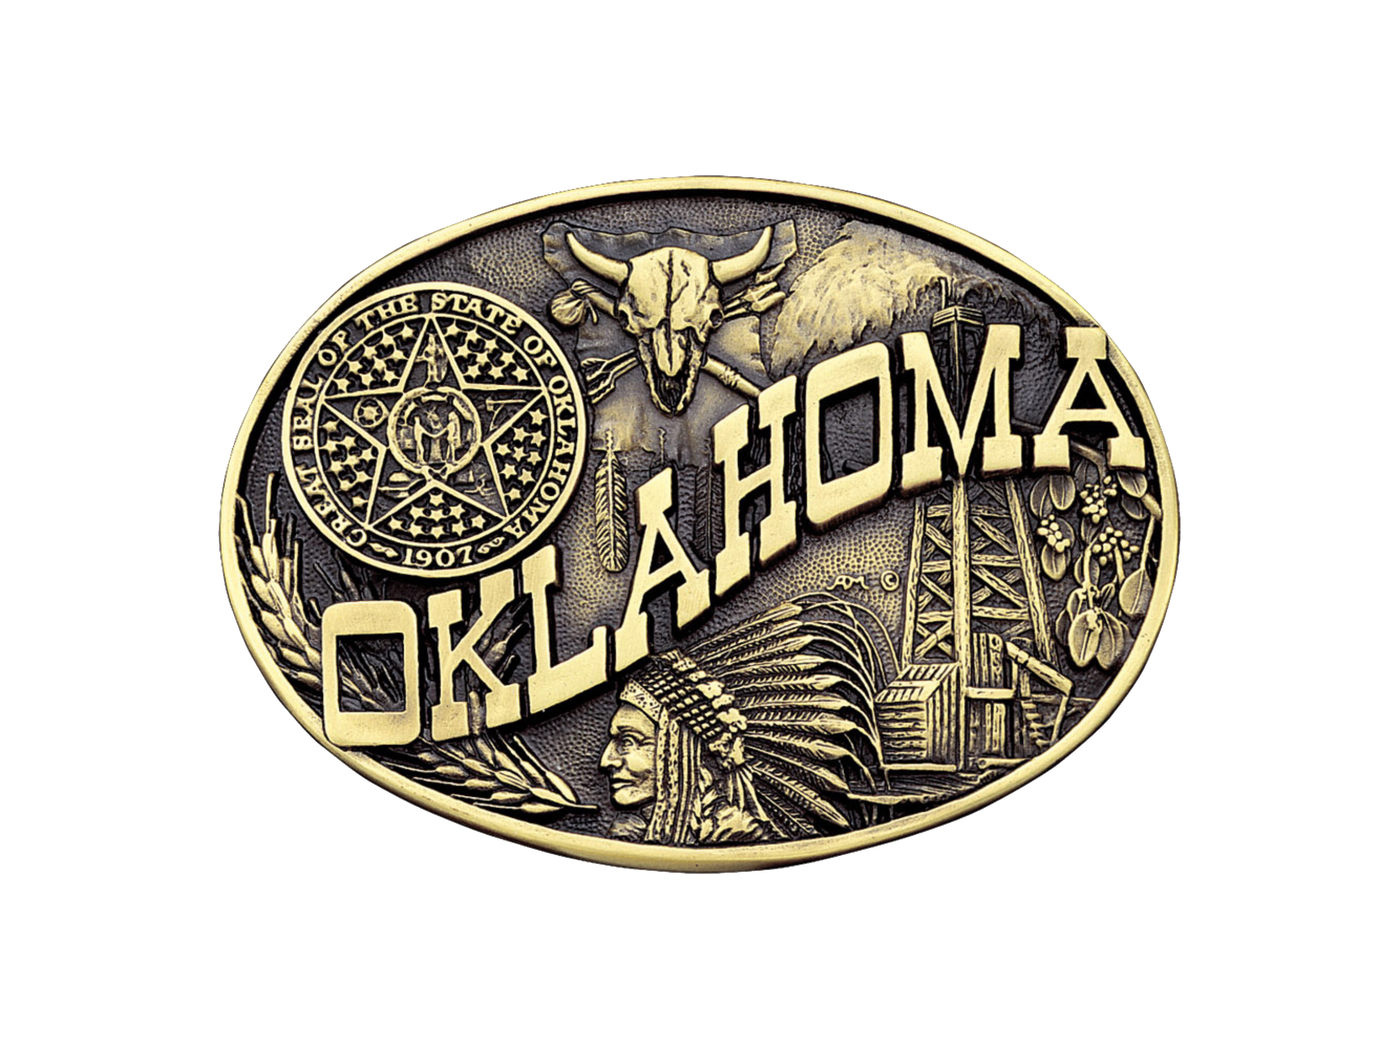 Antiqued brass colored Attitude buckle Oklahoma state and symbols. Standard 1.5 belt swivel. Available online and at our shop in Smyrna, TN, just outside of Nashville.